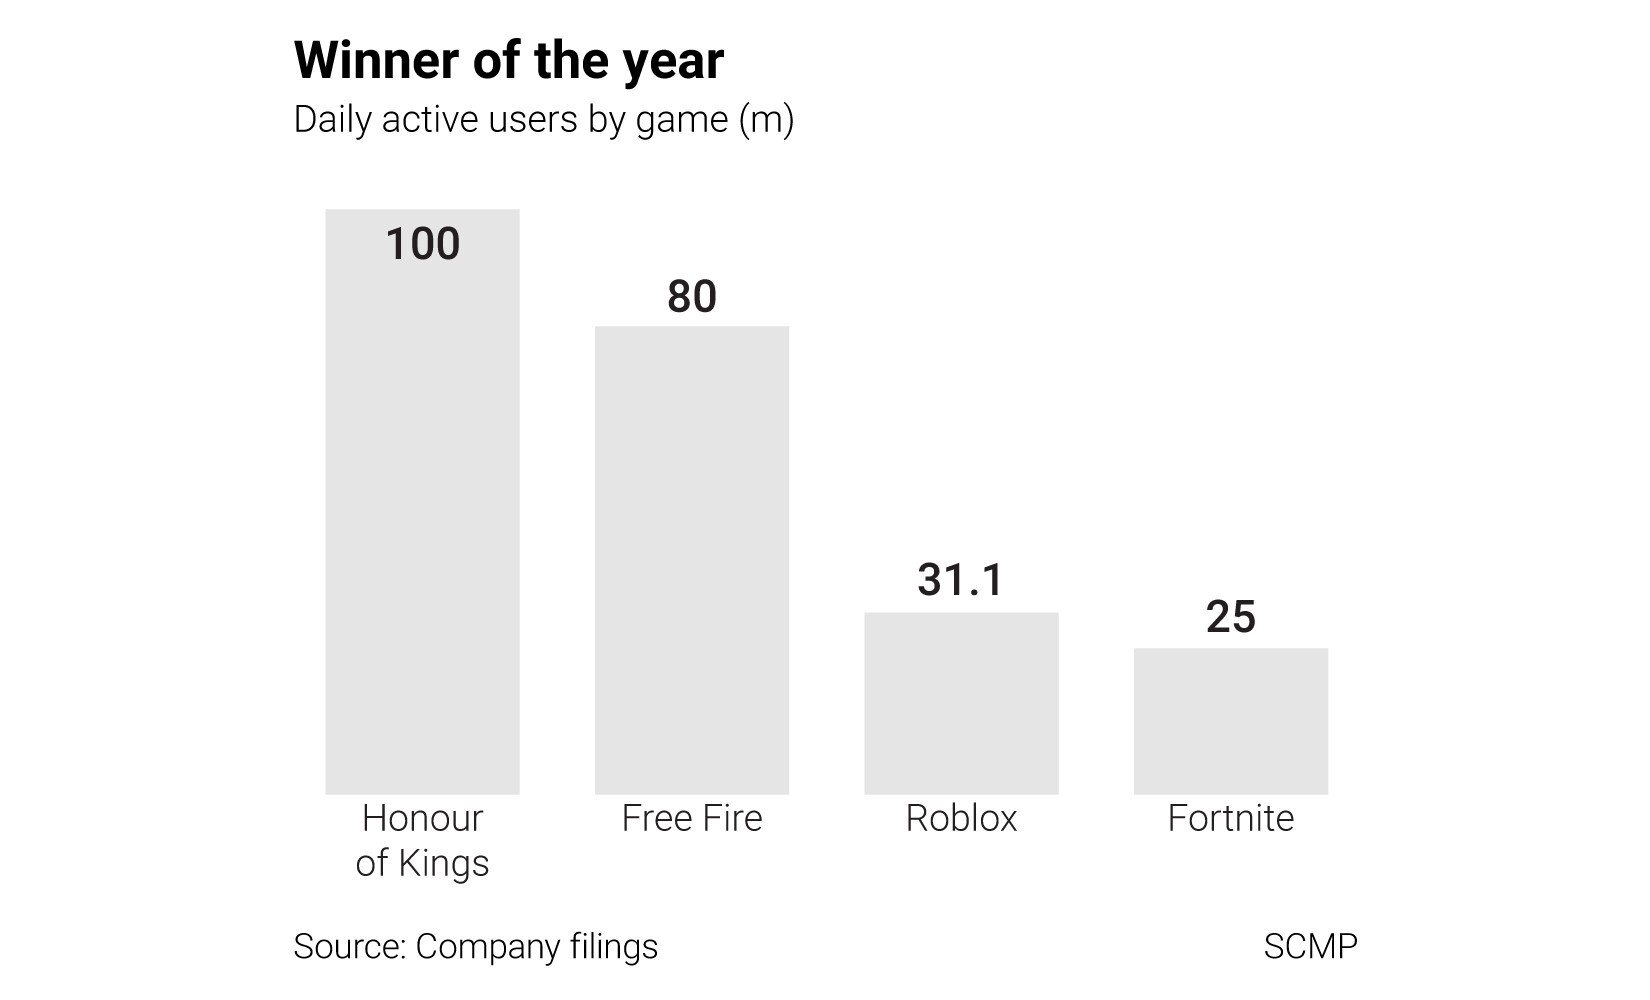 Honor of Kings,' the Red-Hot Mobile Game in China, Tries to Crack